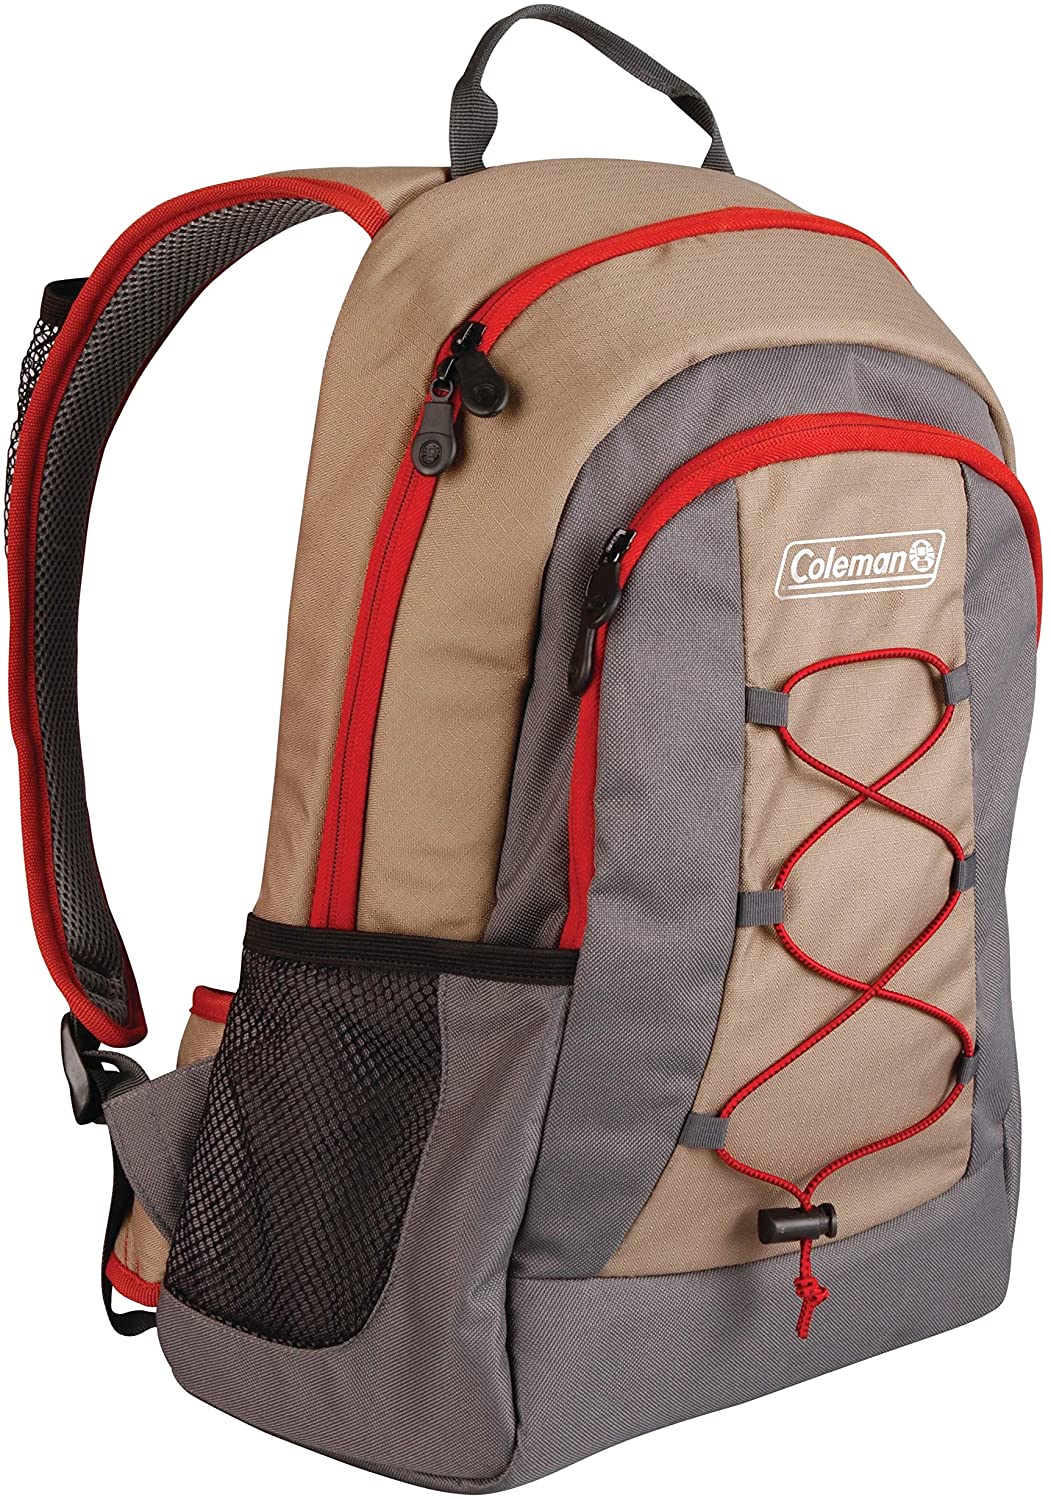 Coleman Insulated Soft Backpack Cooler